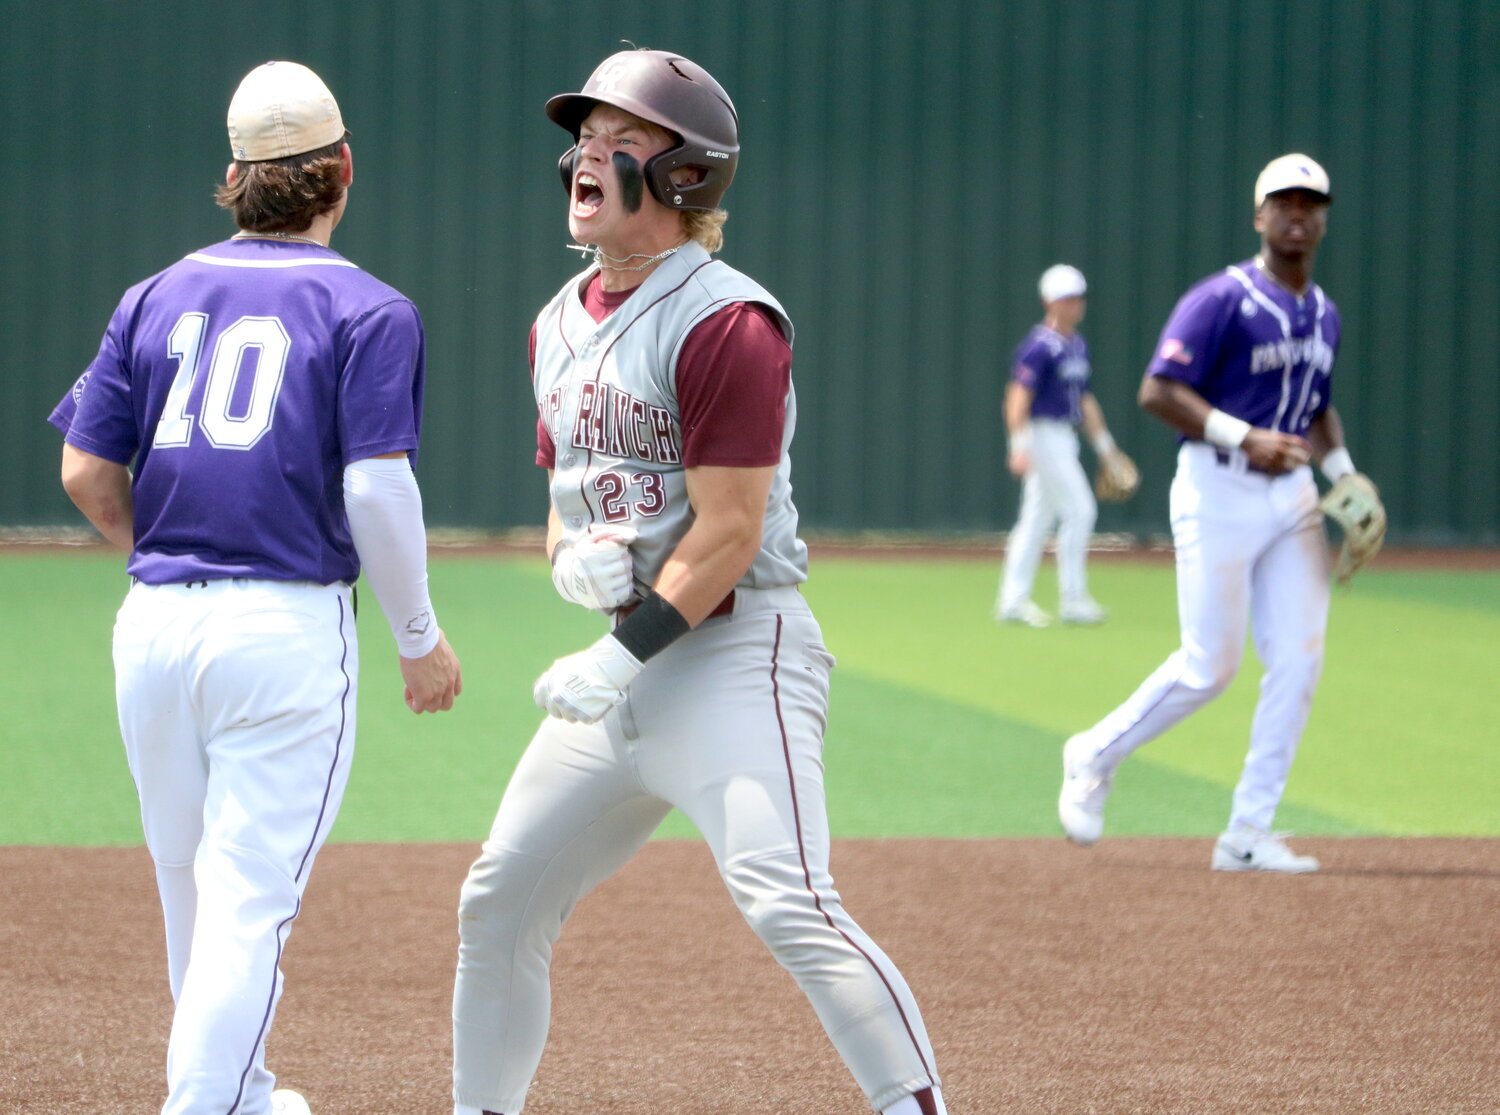 Logan Sosolik celebrates after hitting a triple during Saturday's Regional Quarterfinal between Cinco Ranch and Ridge Point.